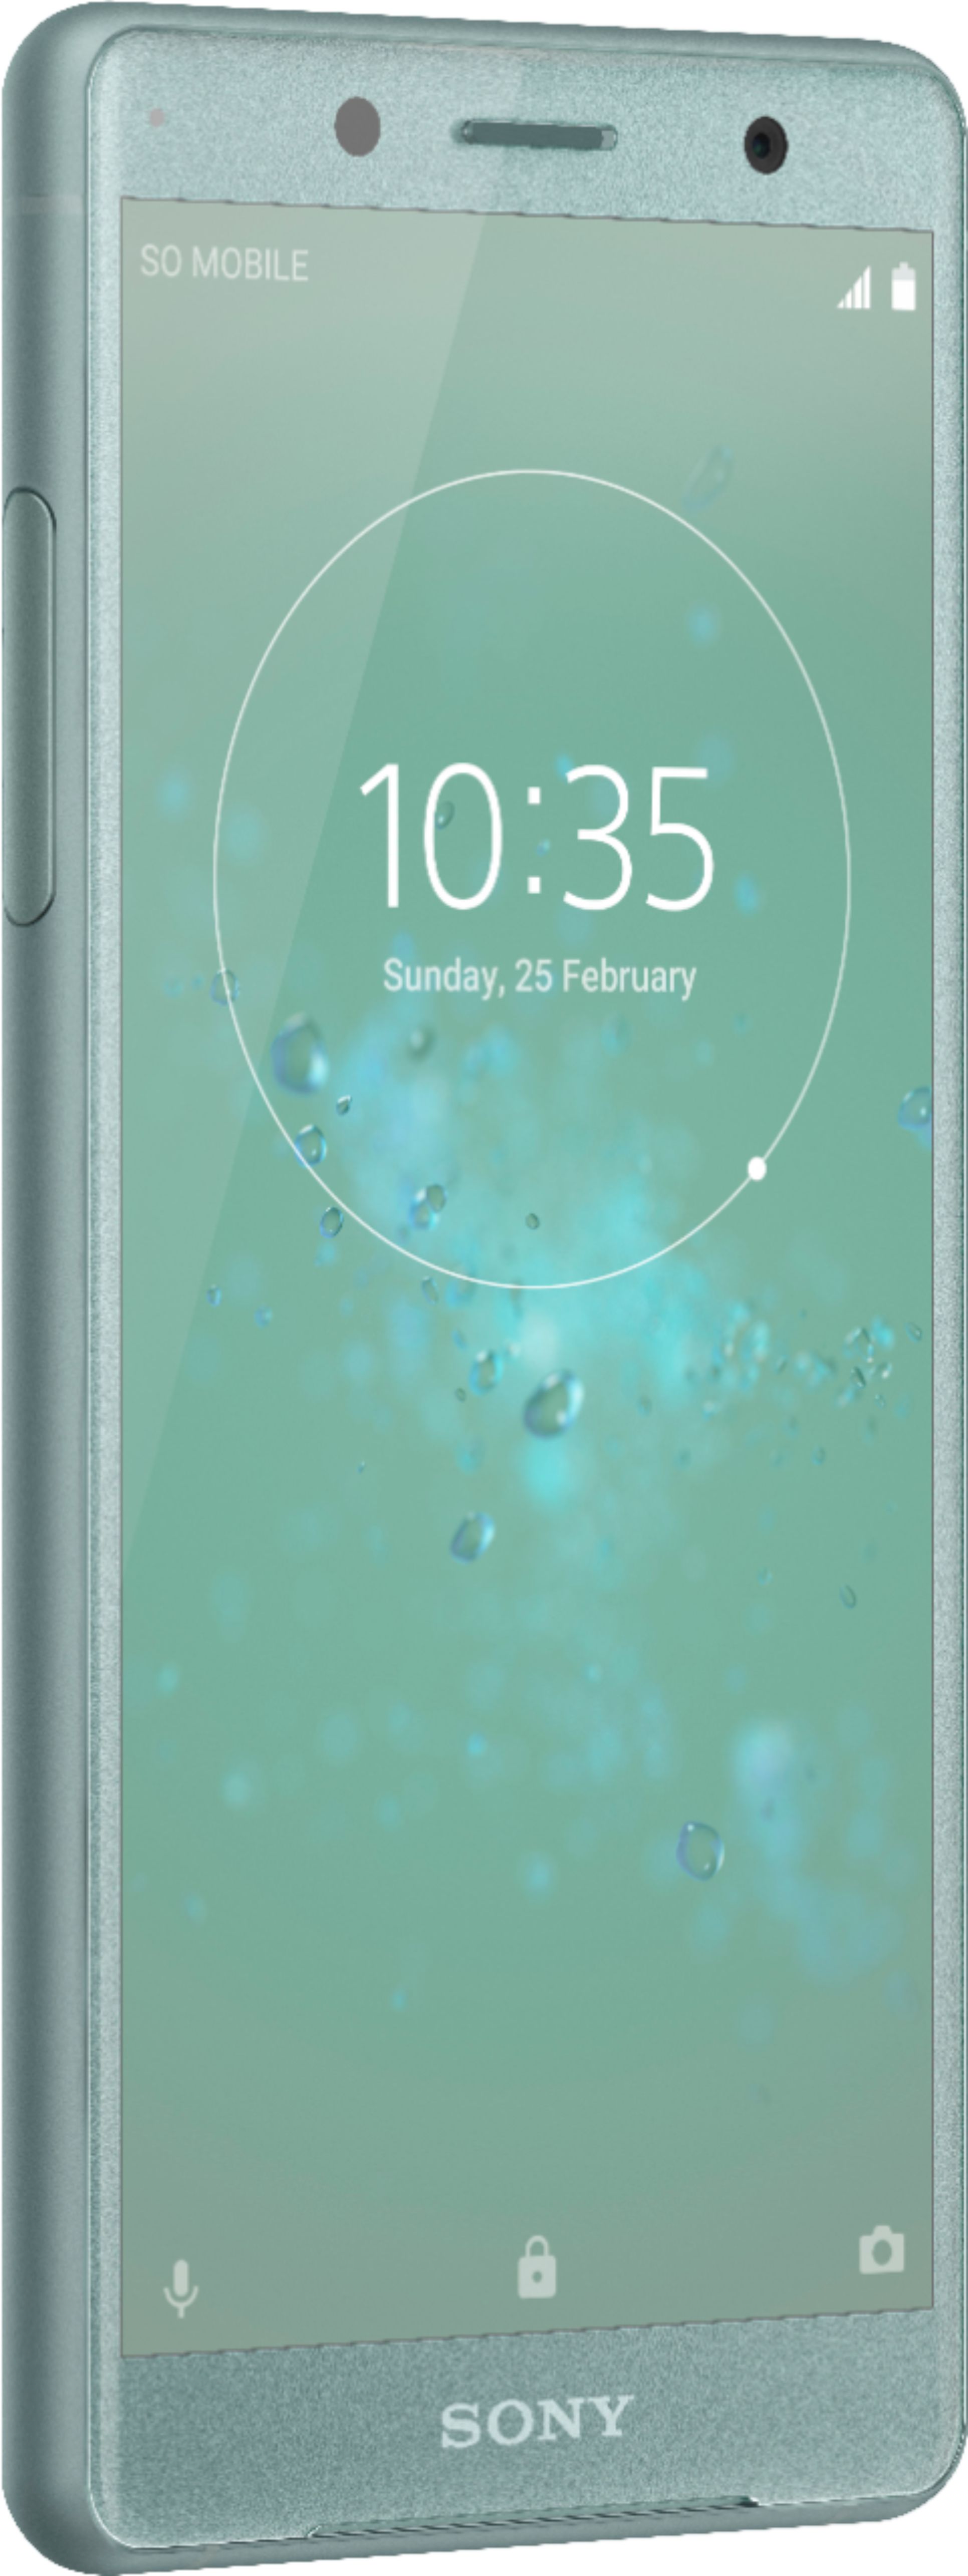 Sony Xperia Xz2 Compact With 64gb Memory Cell Phone Unlocked Moss Green H14 Best Buy